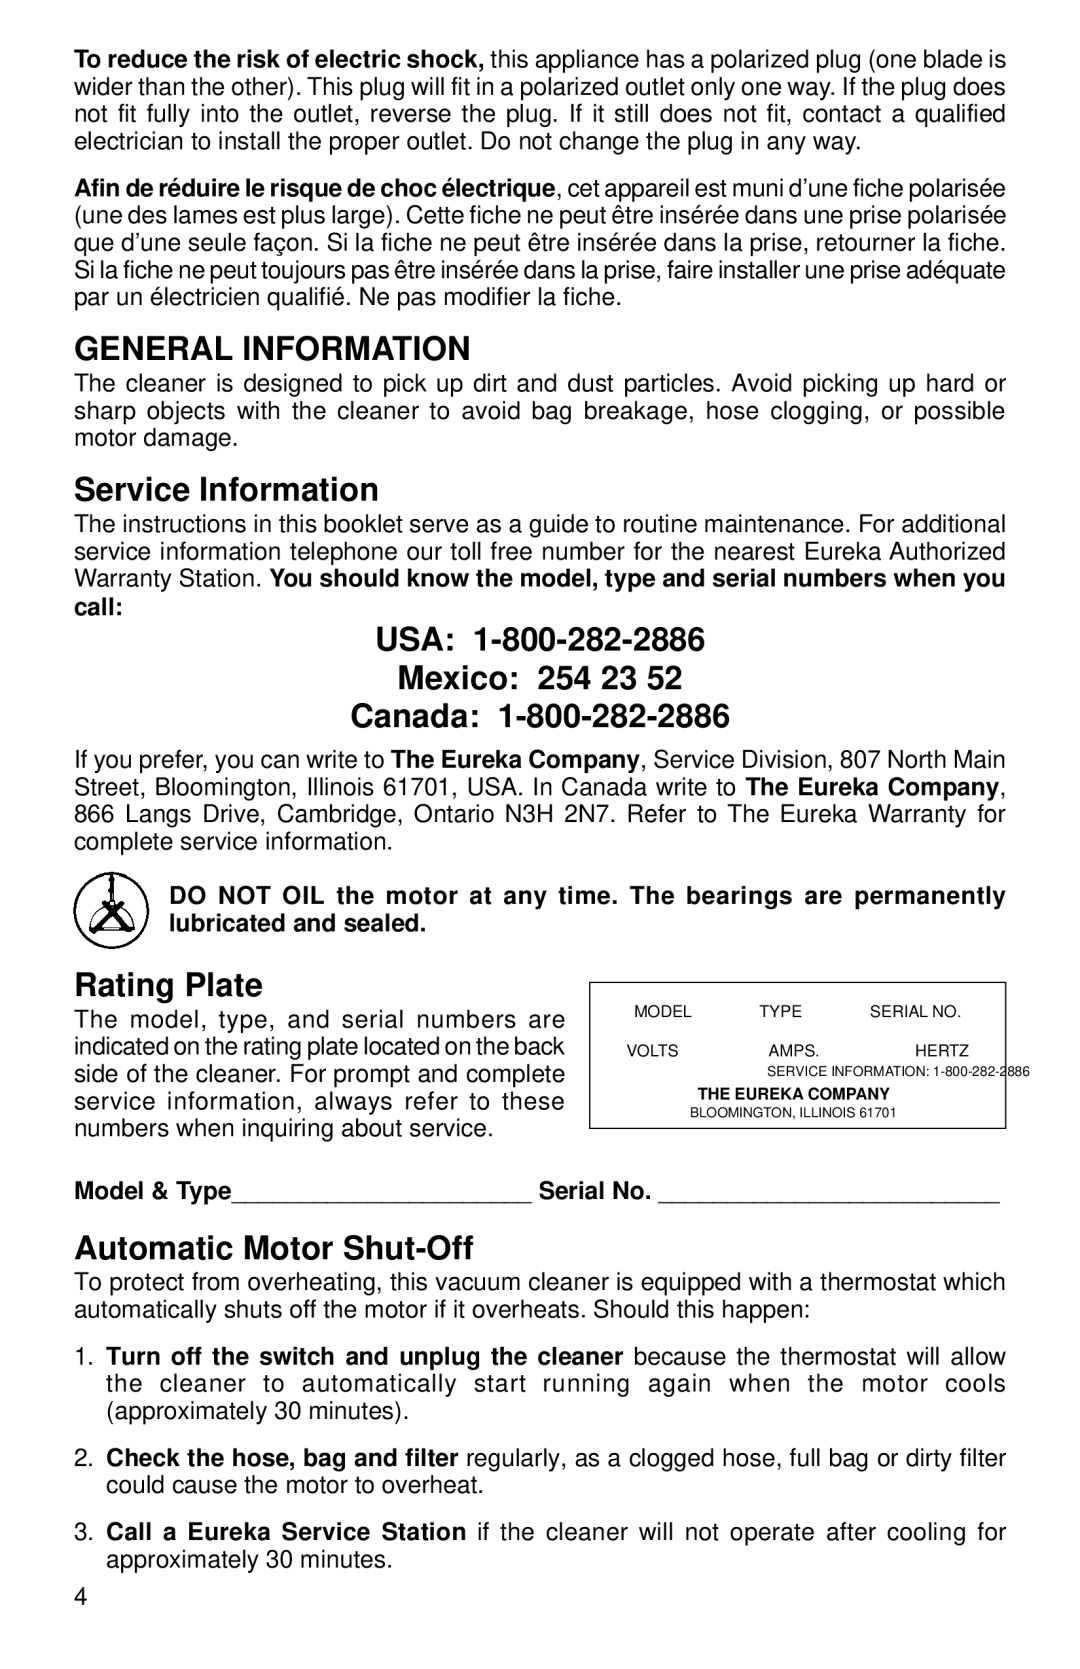 Eureka 3670-3695 warranty General Information, Service Information, USA Mexico 254 23 Canada, Rating Plate 